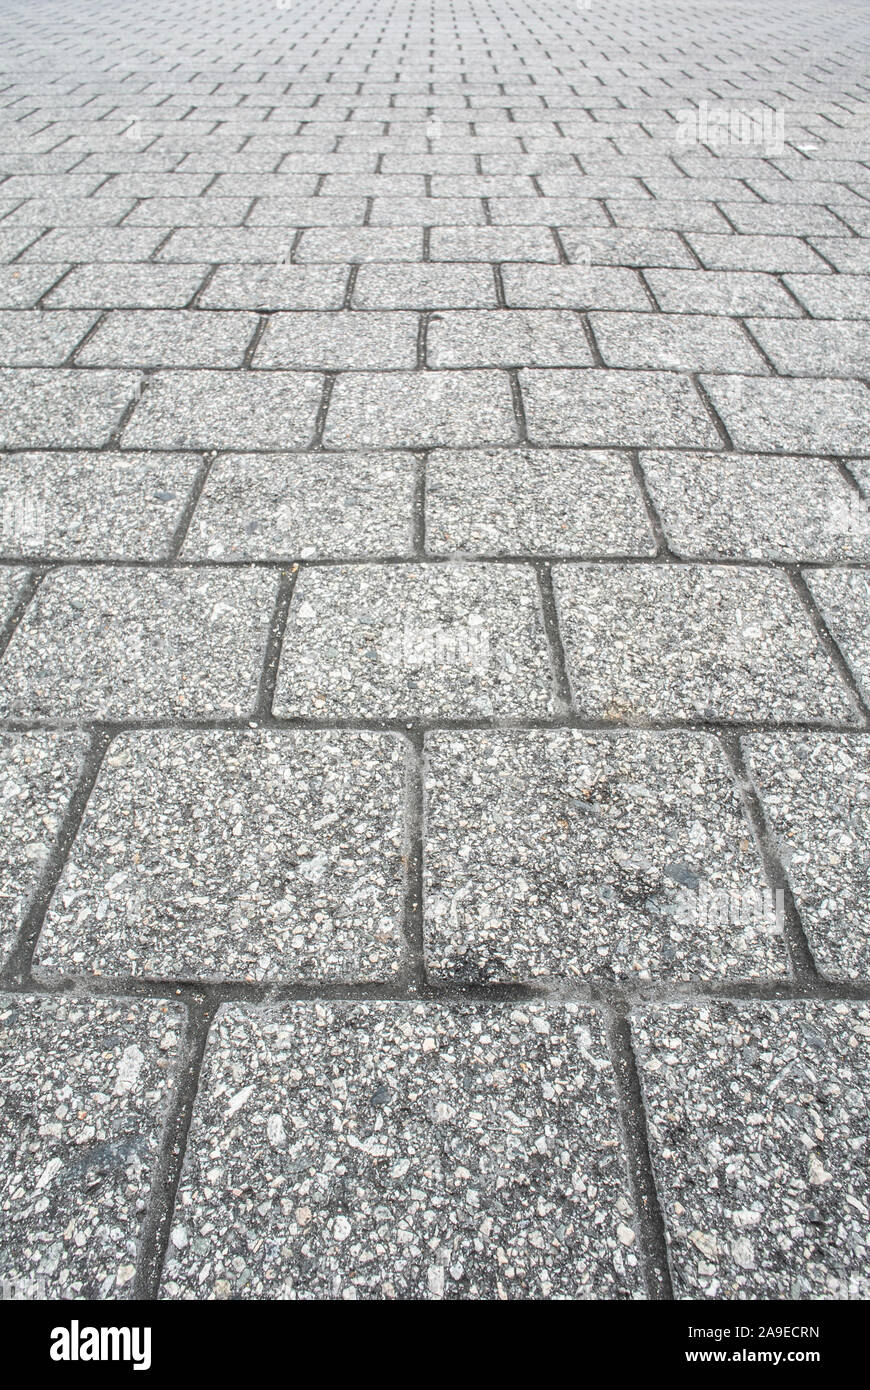 Gray Square Texture Or Porous Tile Pavement Or Floor Background